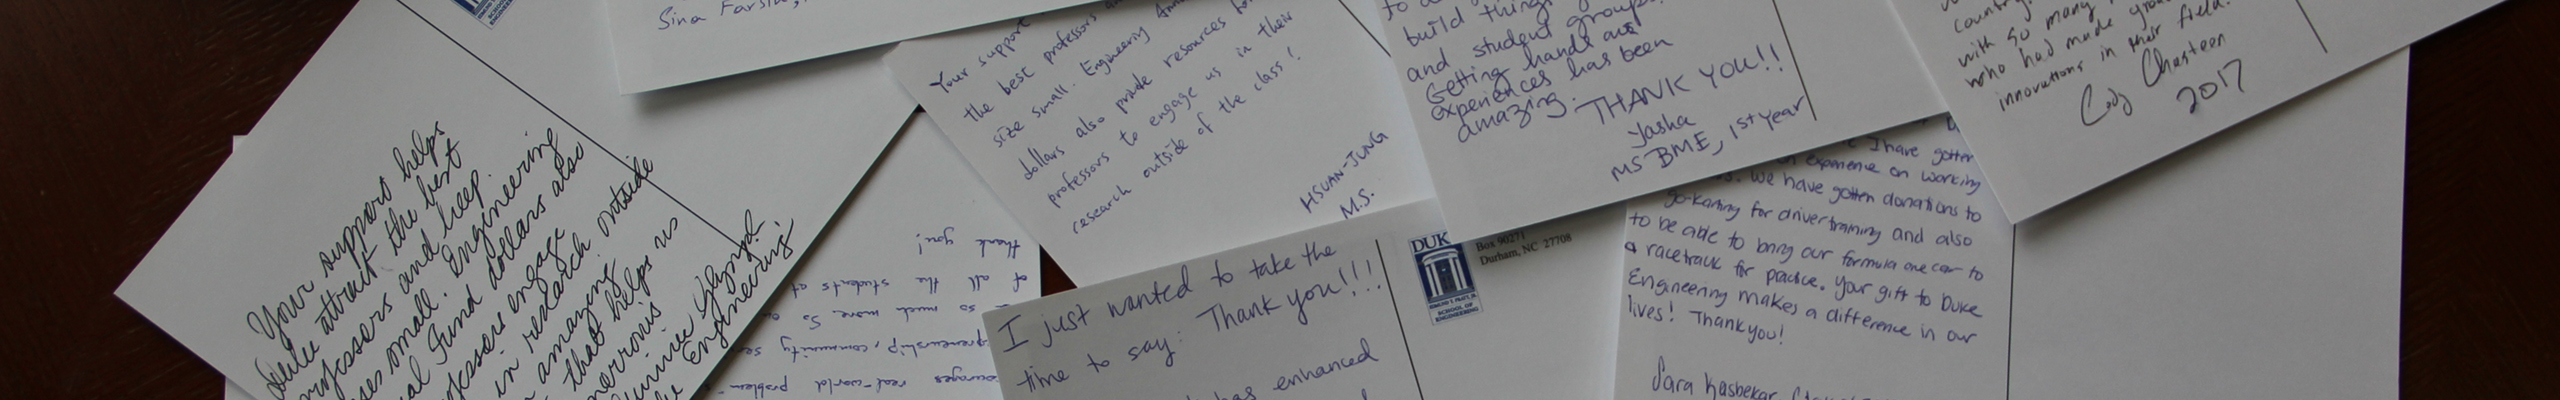 handwritten thank-you notes to Annual Fund donors